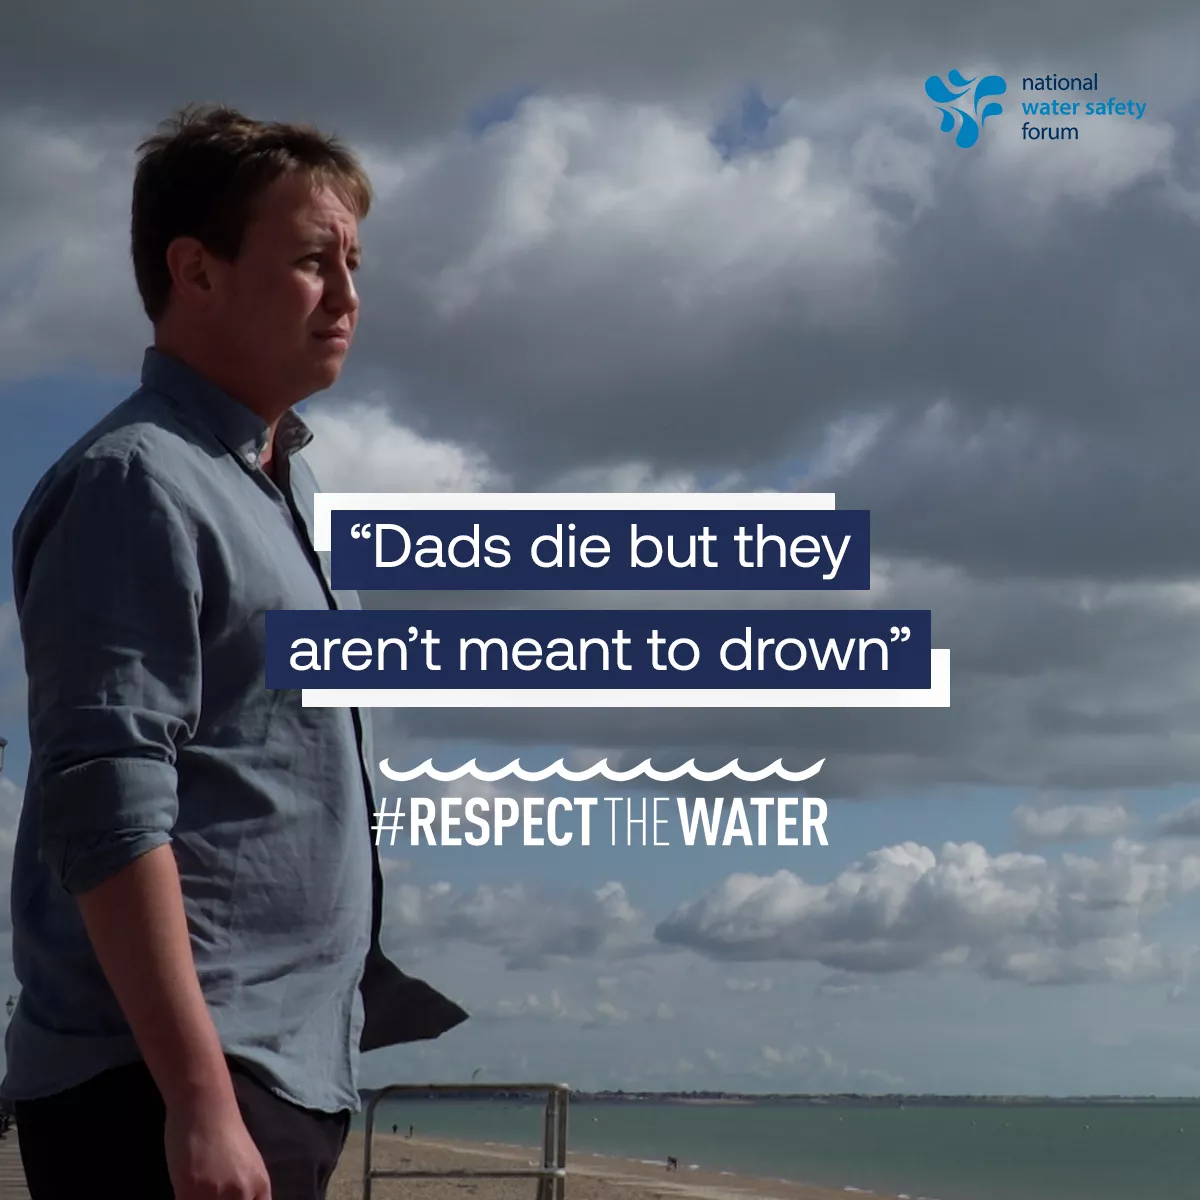 Robbie Jones looking out with quote “Dads die, but they aren’t meant to drown”